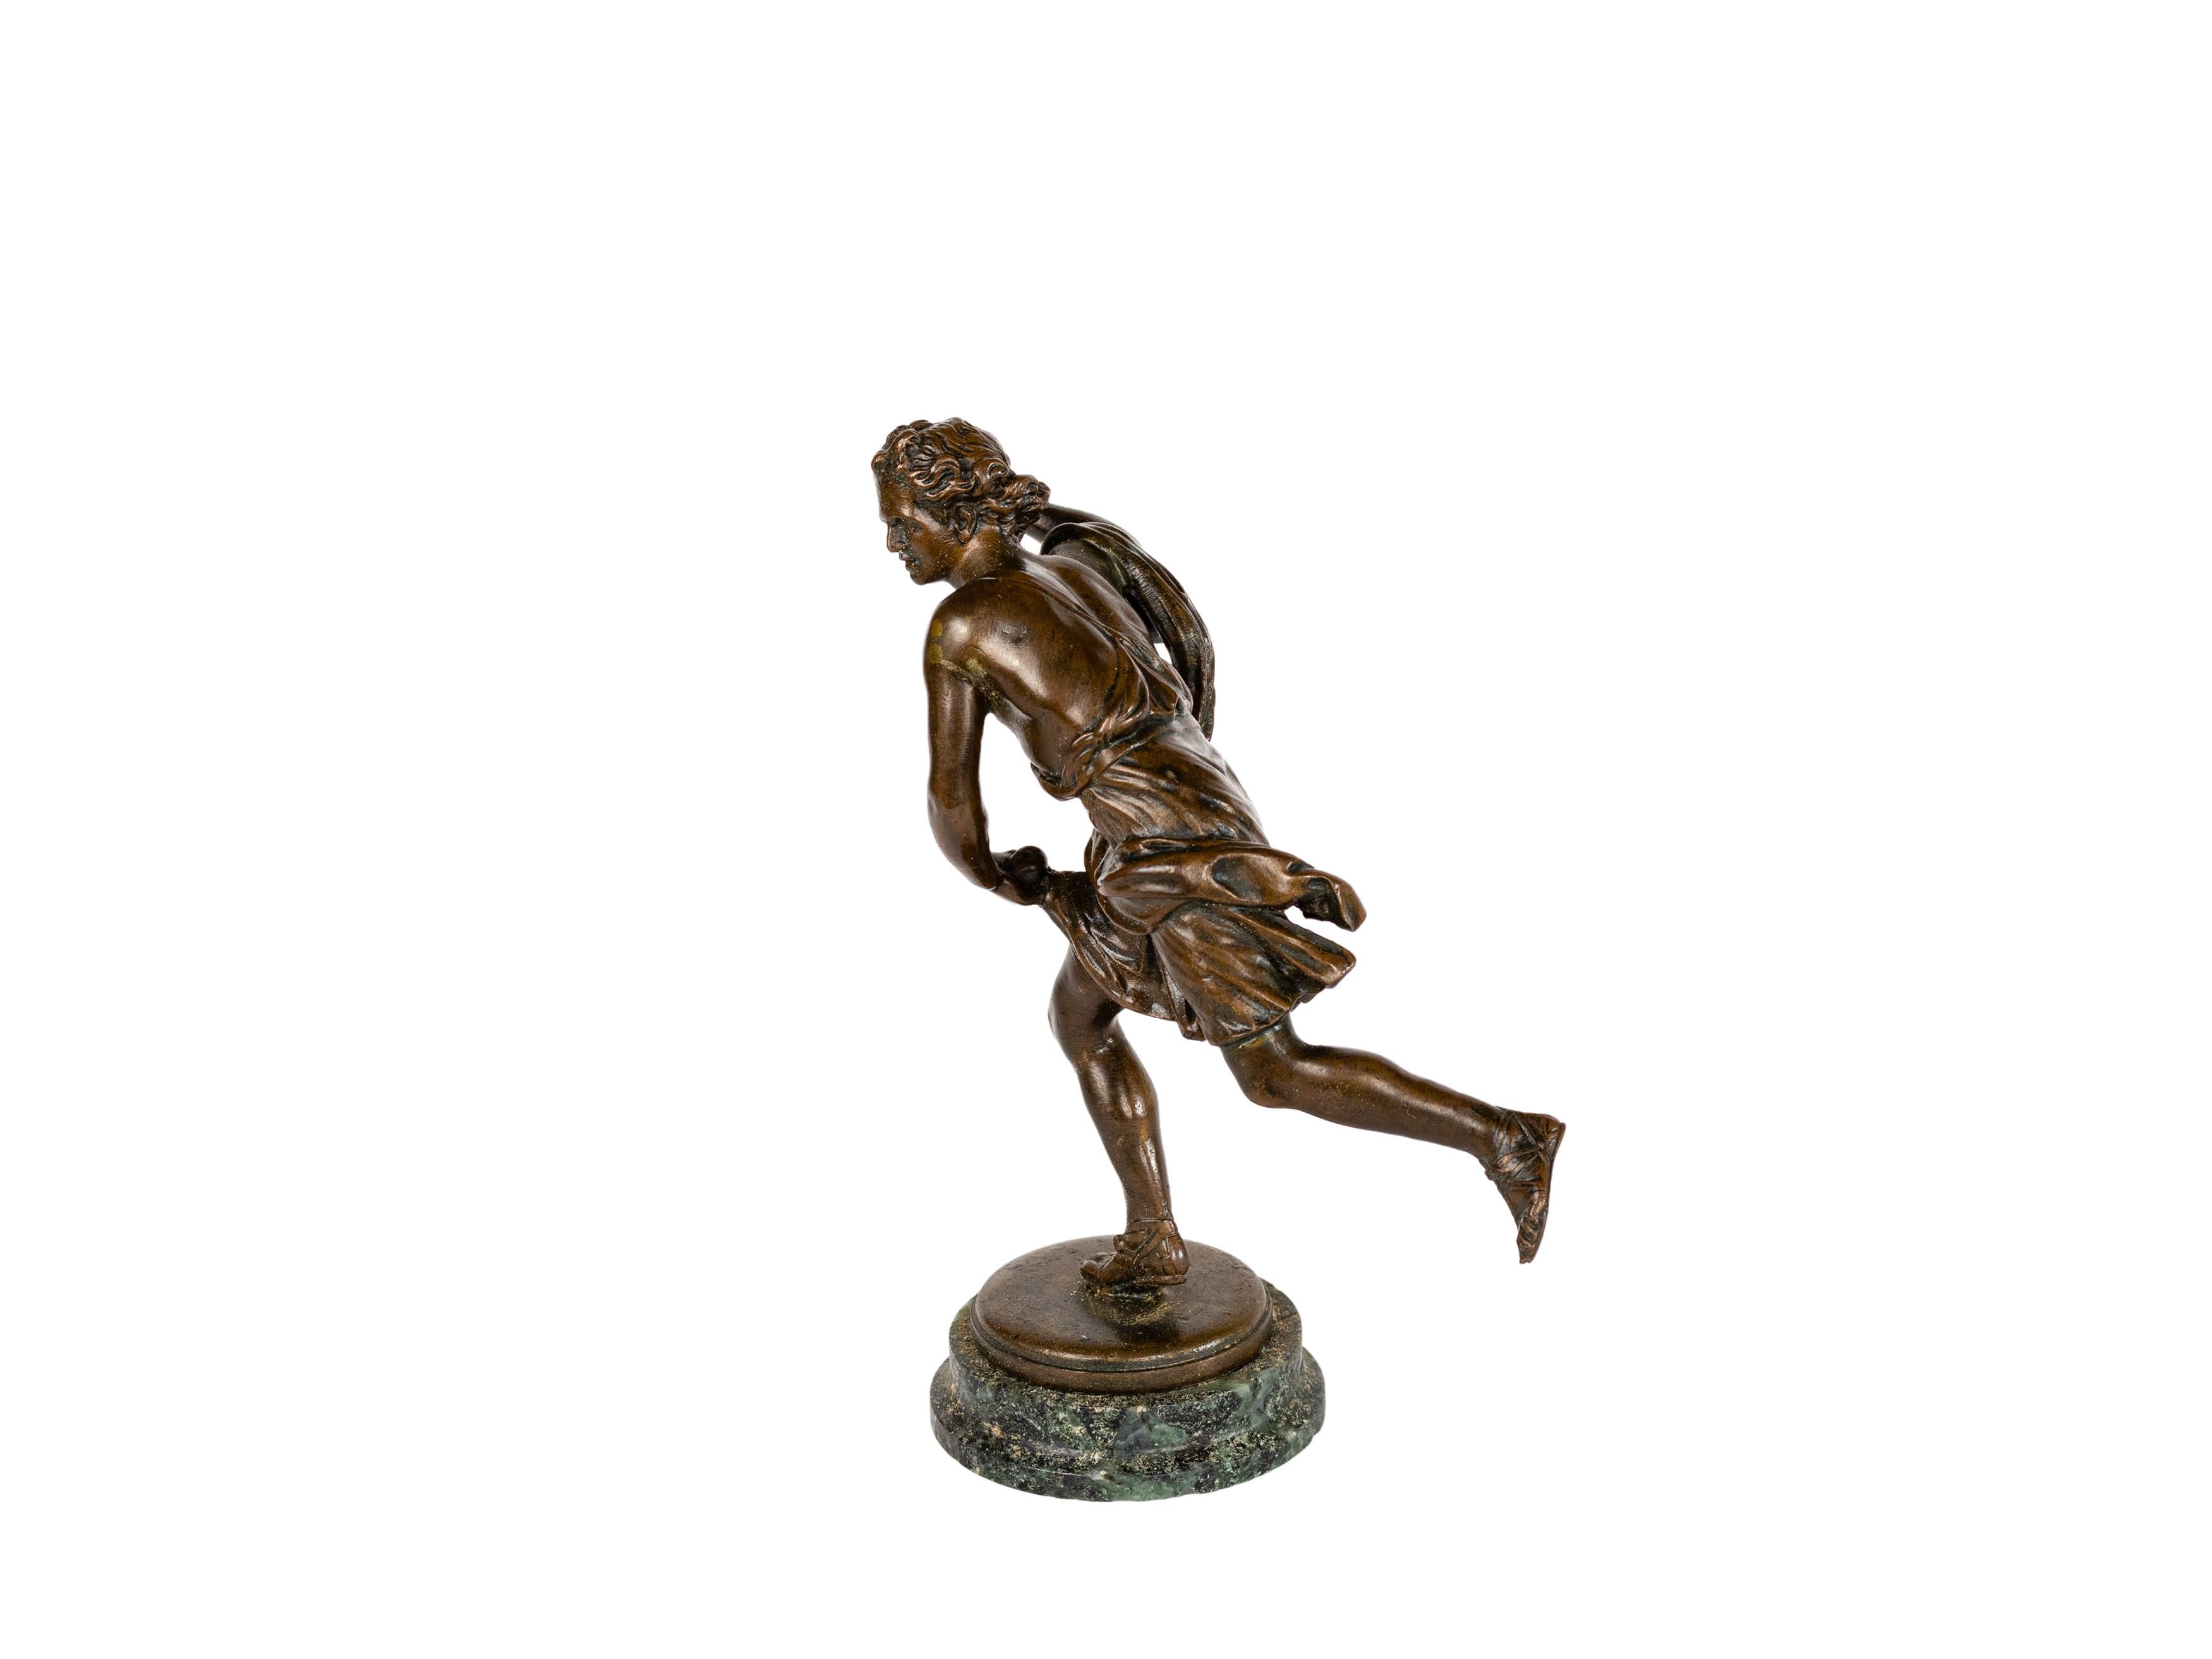 A French bronze statue of Hippomenes throwing apples while racing, titled «Hippomène Lanceur De Pommes D’or» with a «Fumiere et Cie» mark on the base.
Except for Hippomenes, Atalanta outran all of her suitors. Hippomenes thought he couldn't compete